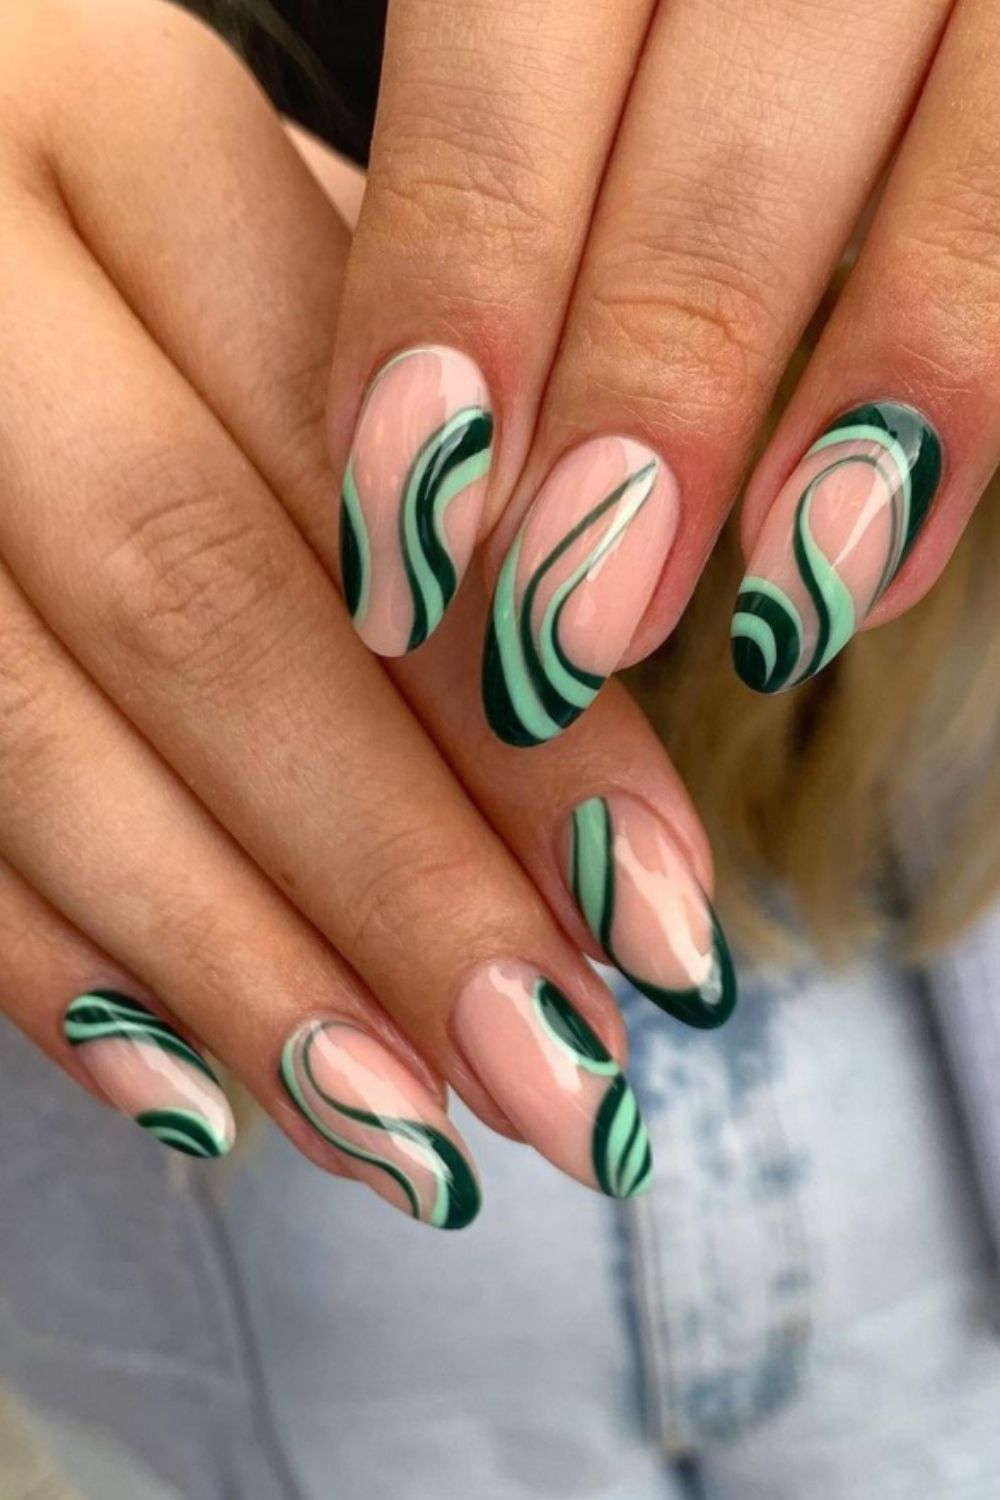 Pink and green almond nail designs